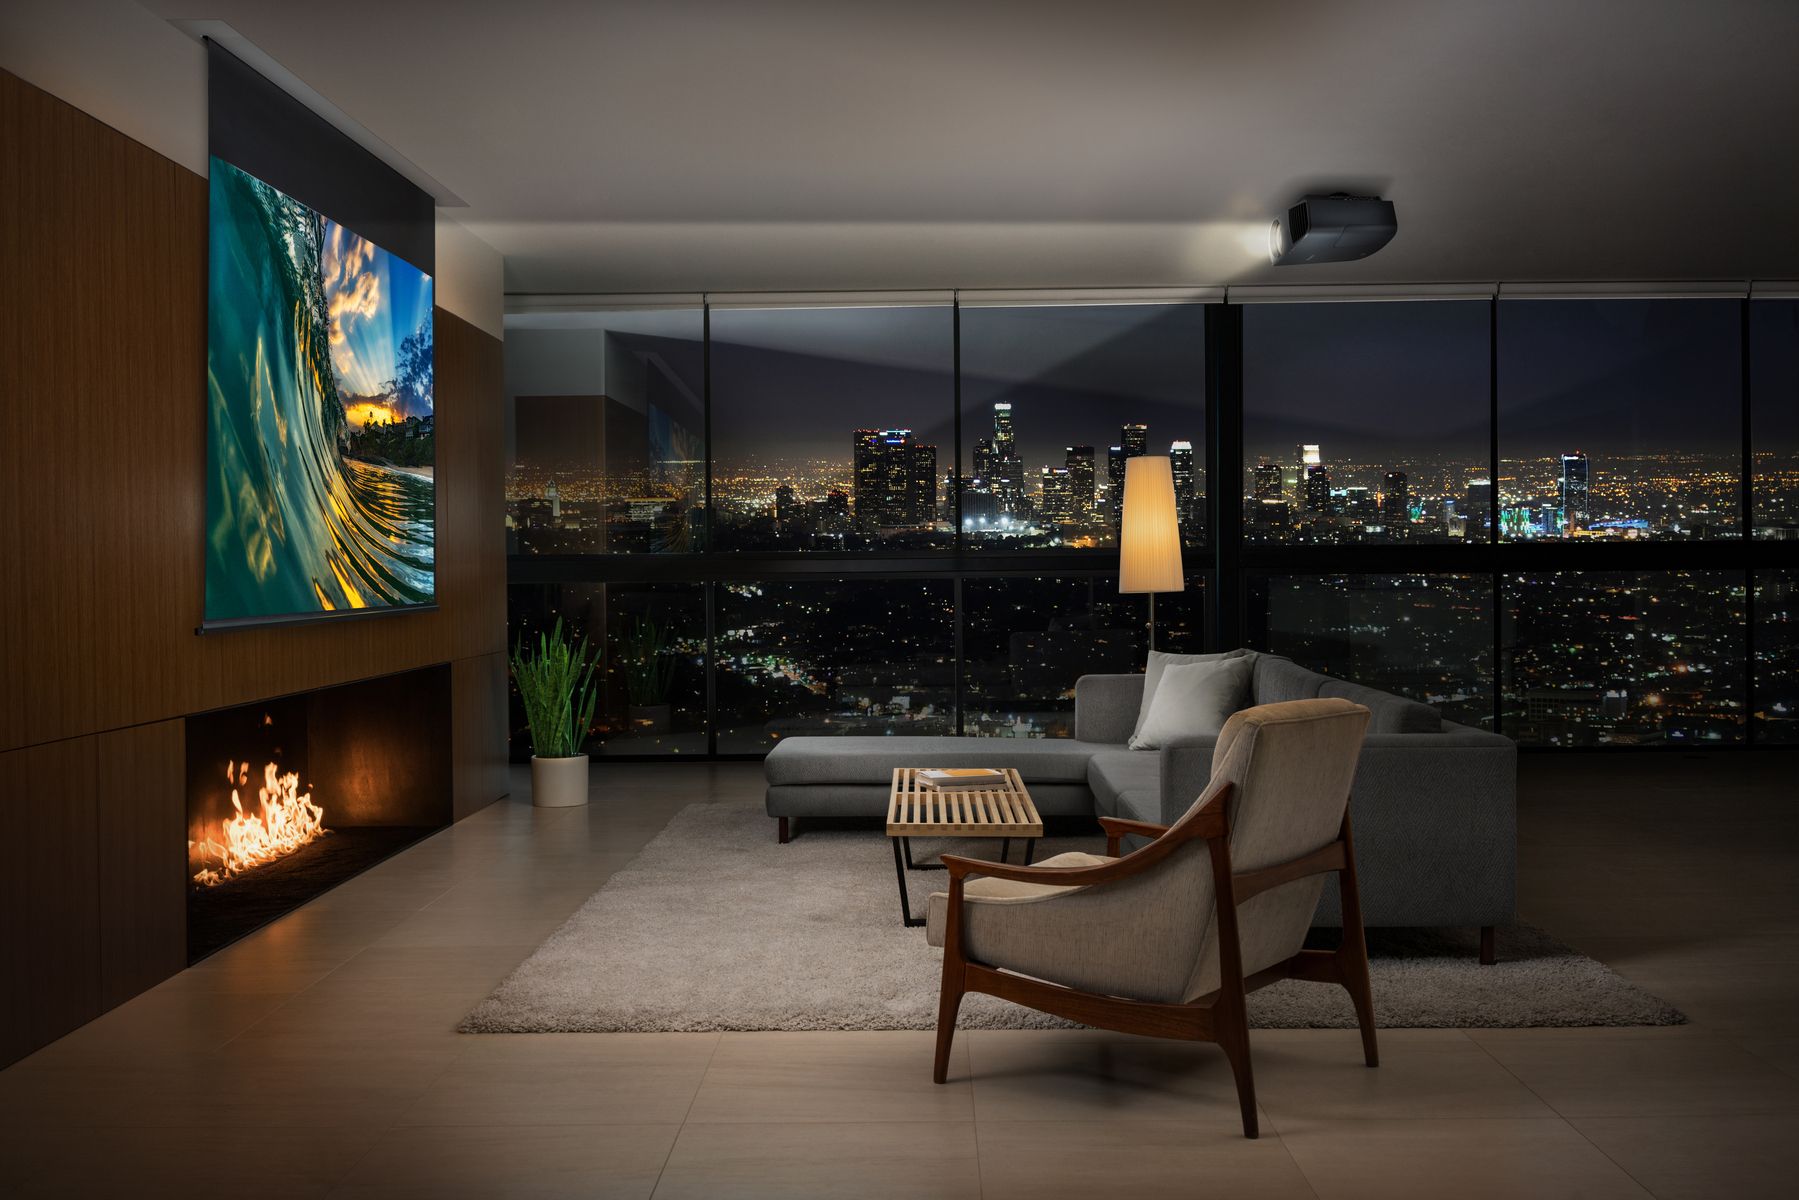 Sony projector on ceiling with city view out the windows